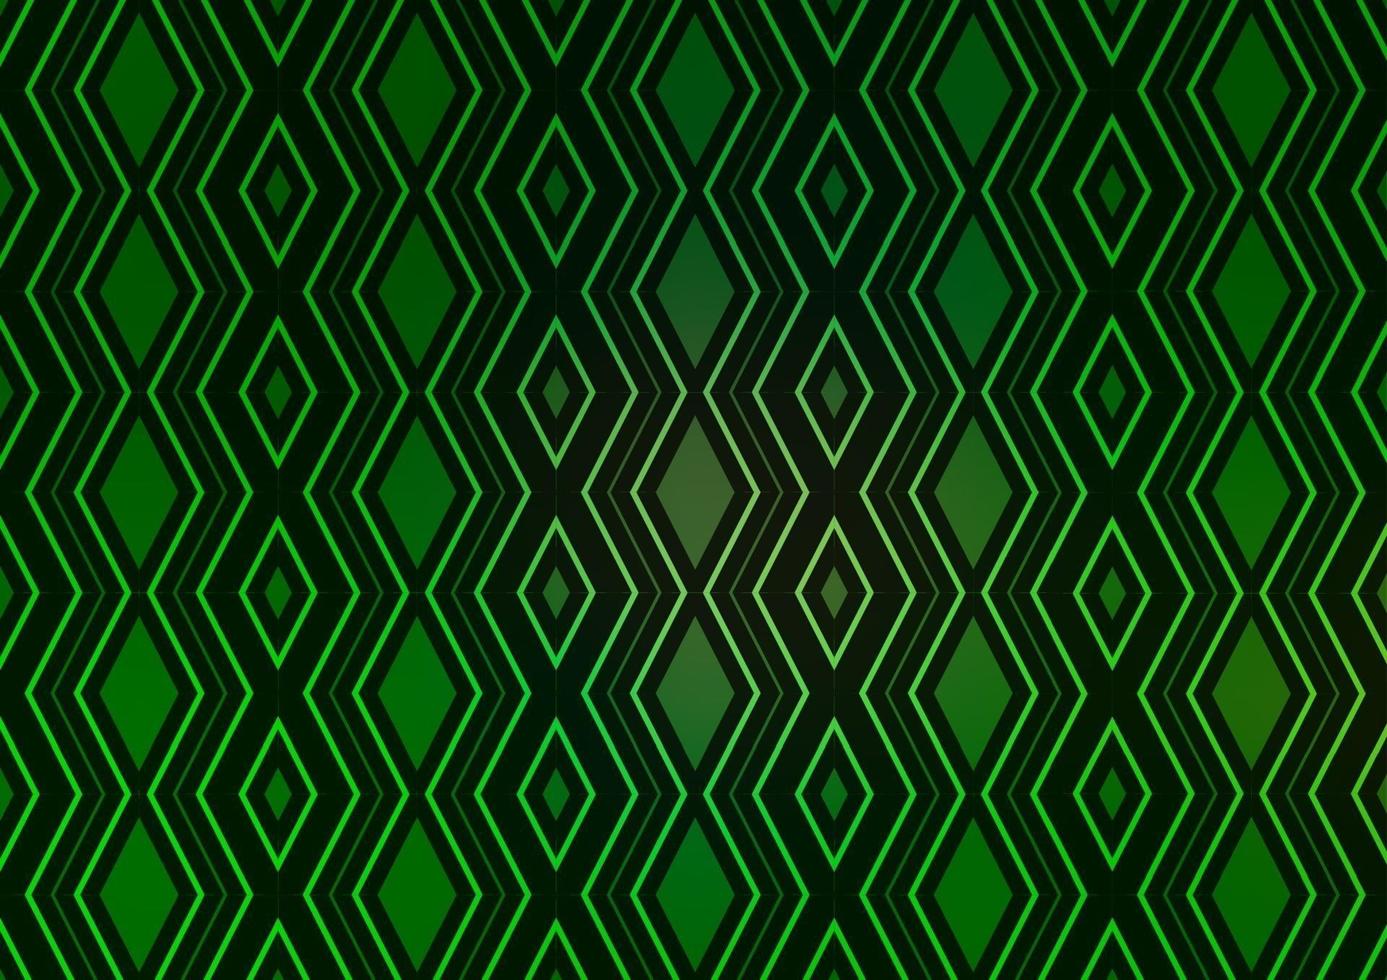 Light Green vector pattern with lines, rectangles.